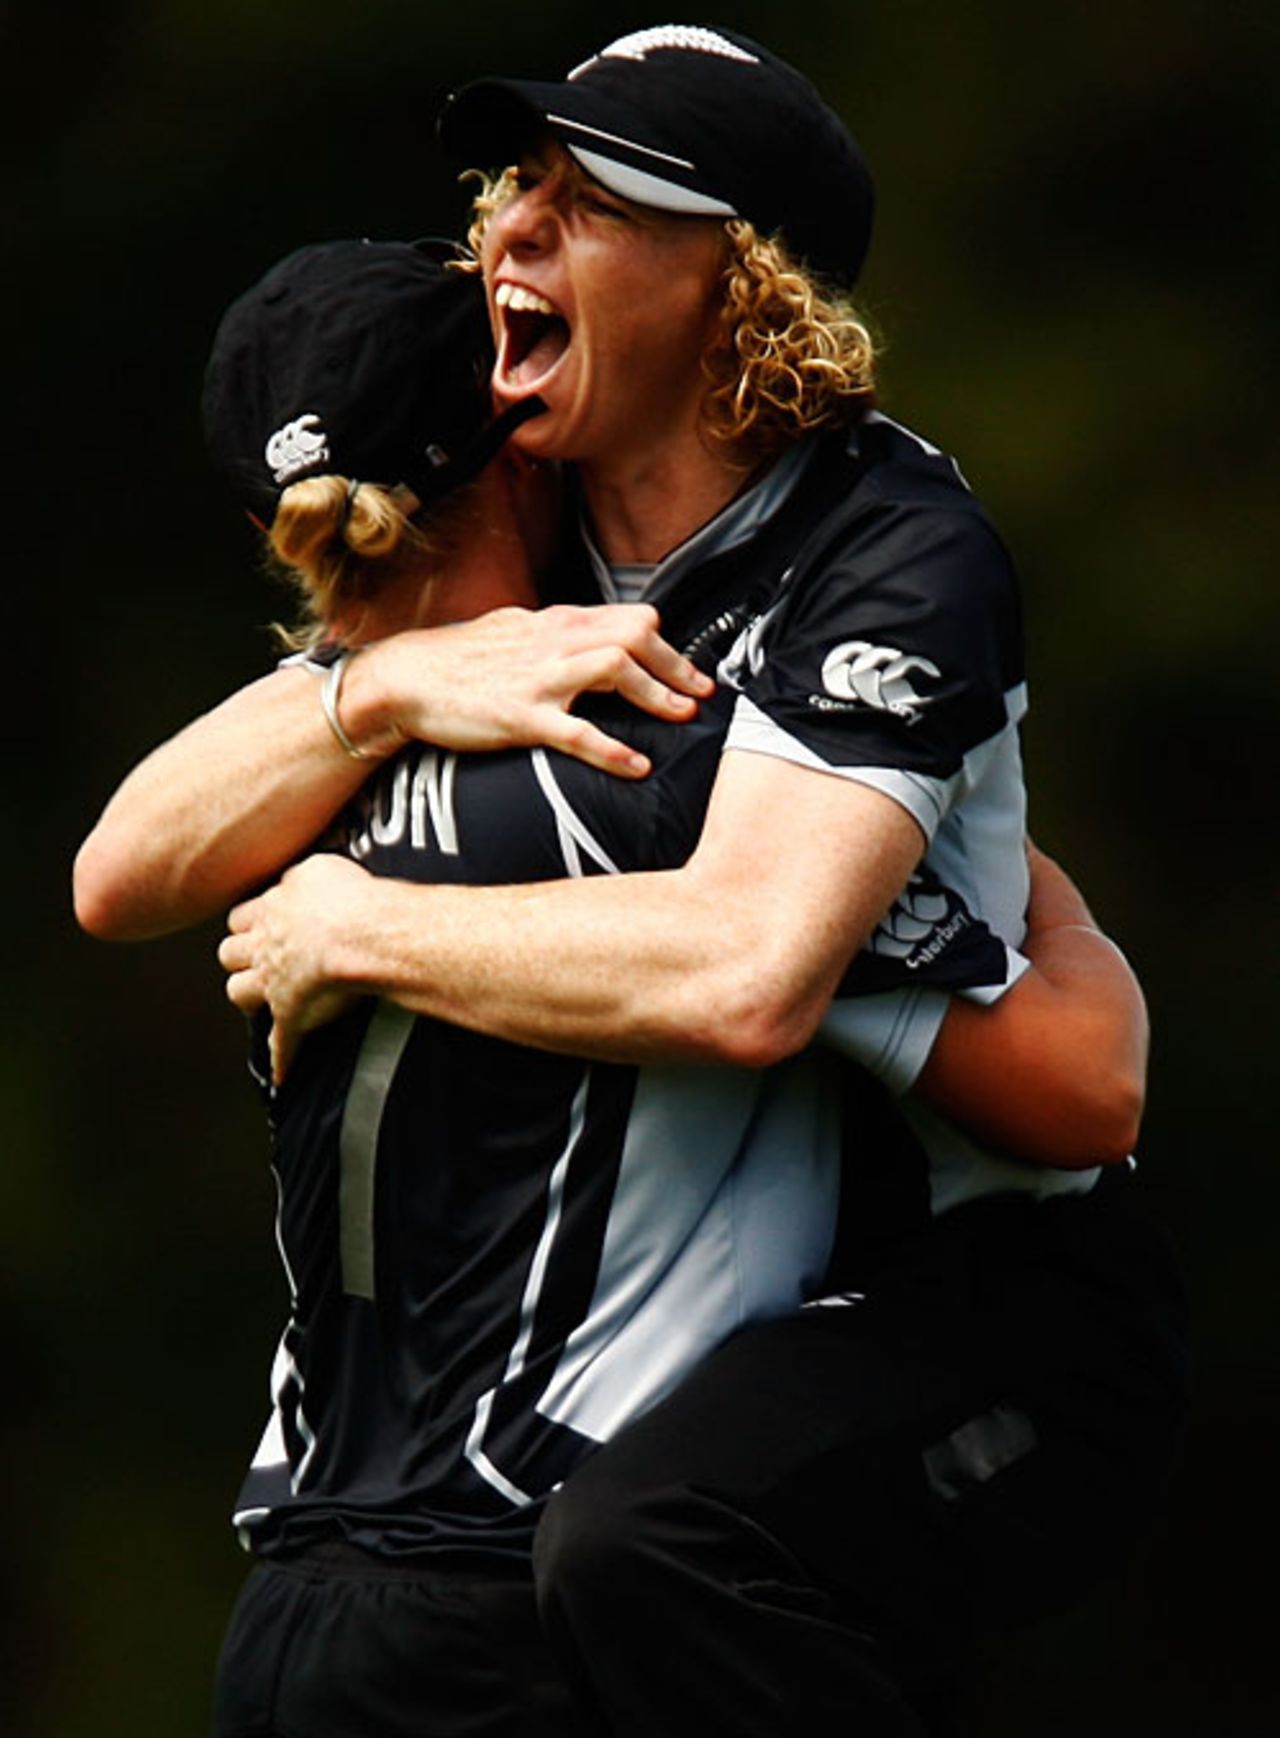 Haidee Tiffen is ecstatic after running out Lydia Greenway, England v New Zealand, Super Six, women's World Cup, Sydney, March 14, 2009